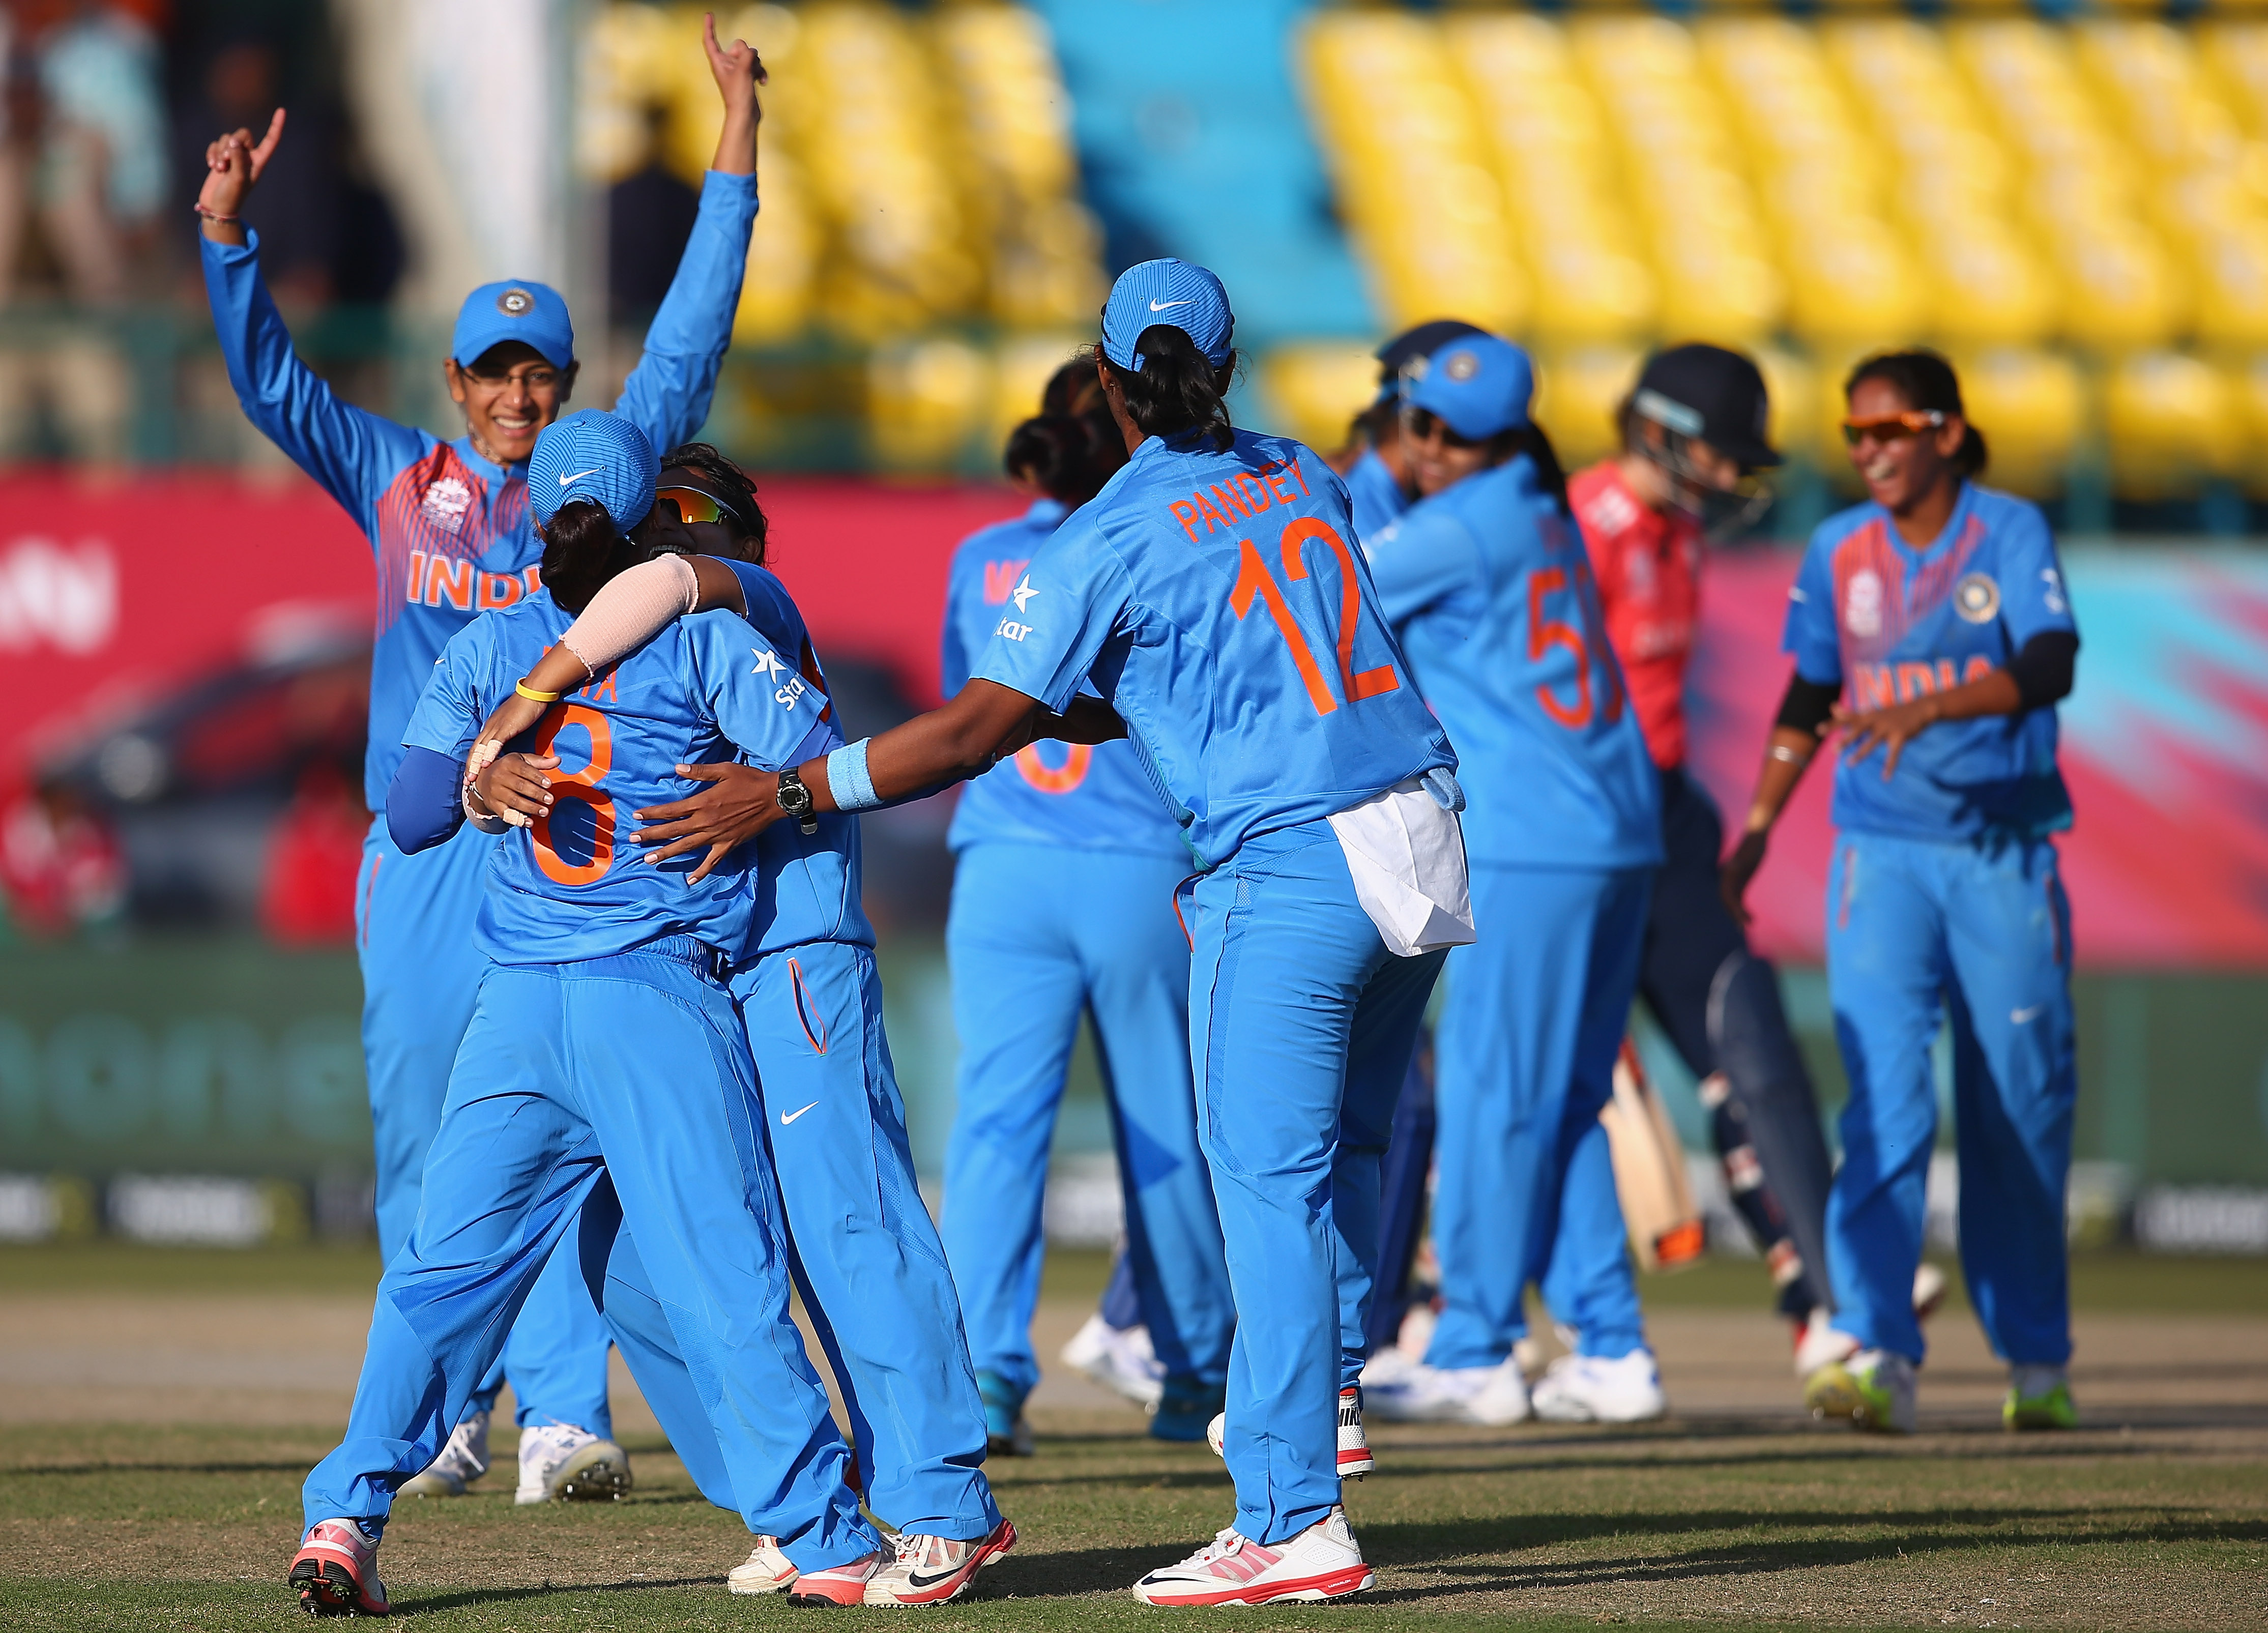 DHARAMSALA, INDIA - MARCH 22:  India celebrate the wicket of Charlotte Edwards, Captain of England during the Women's ICC World Twenty20 India 2016 match between England and India at the HPCA Stadium on March 22, 2016 in Dharamsala, India.  (Photo by Matthew Lewis-IDI/IDI via Getty Images)